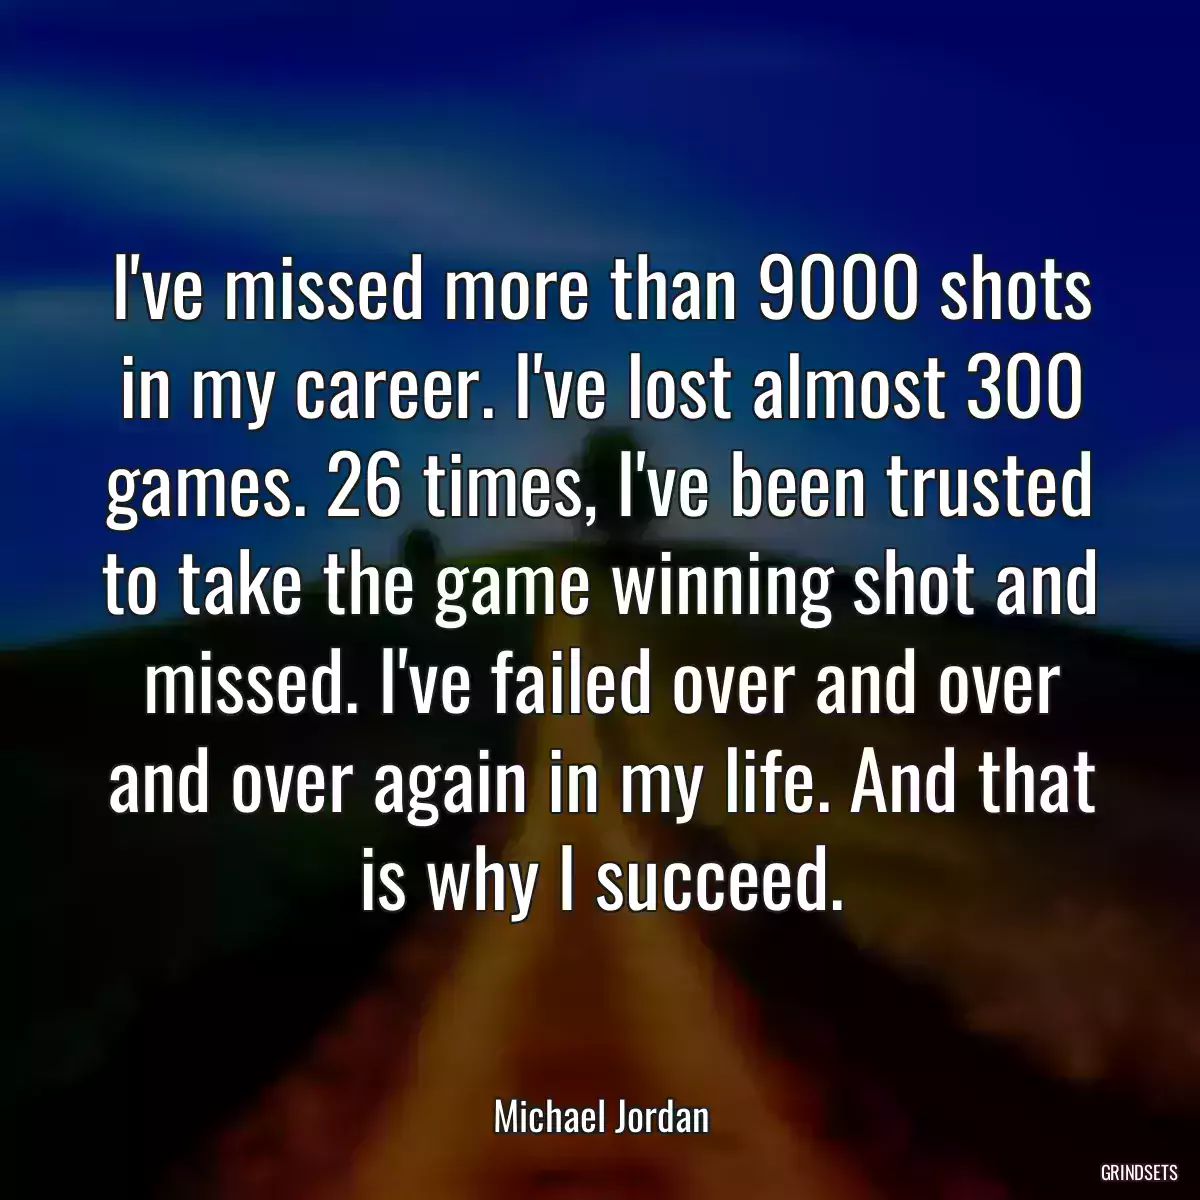 I\'ve missed more than 9000 shots in my career. I\'ve lost almost 300 games. 26 times, I\'ve been trusted to take the game winning shot and missed. I\'ve failed over and over and over again in my life. And that is why I succeed.